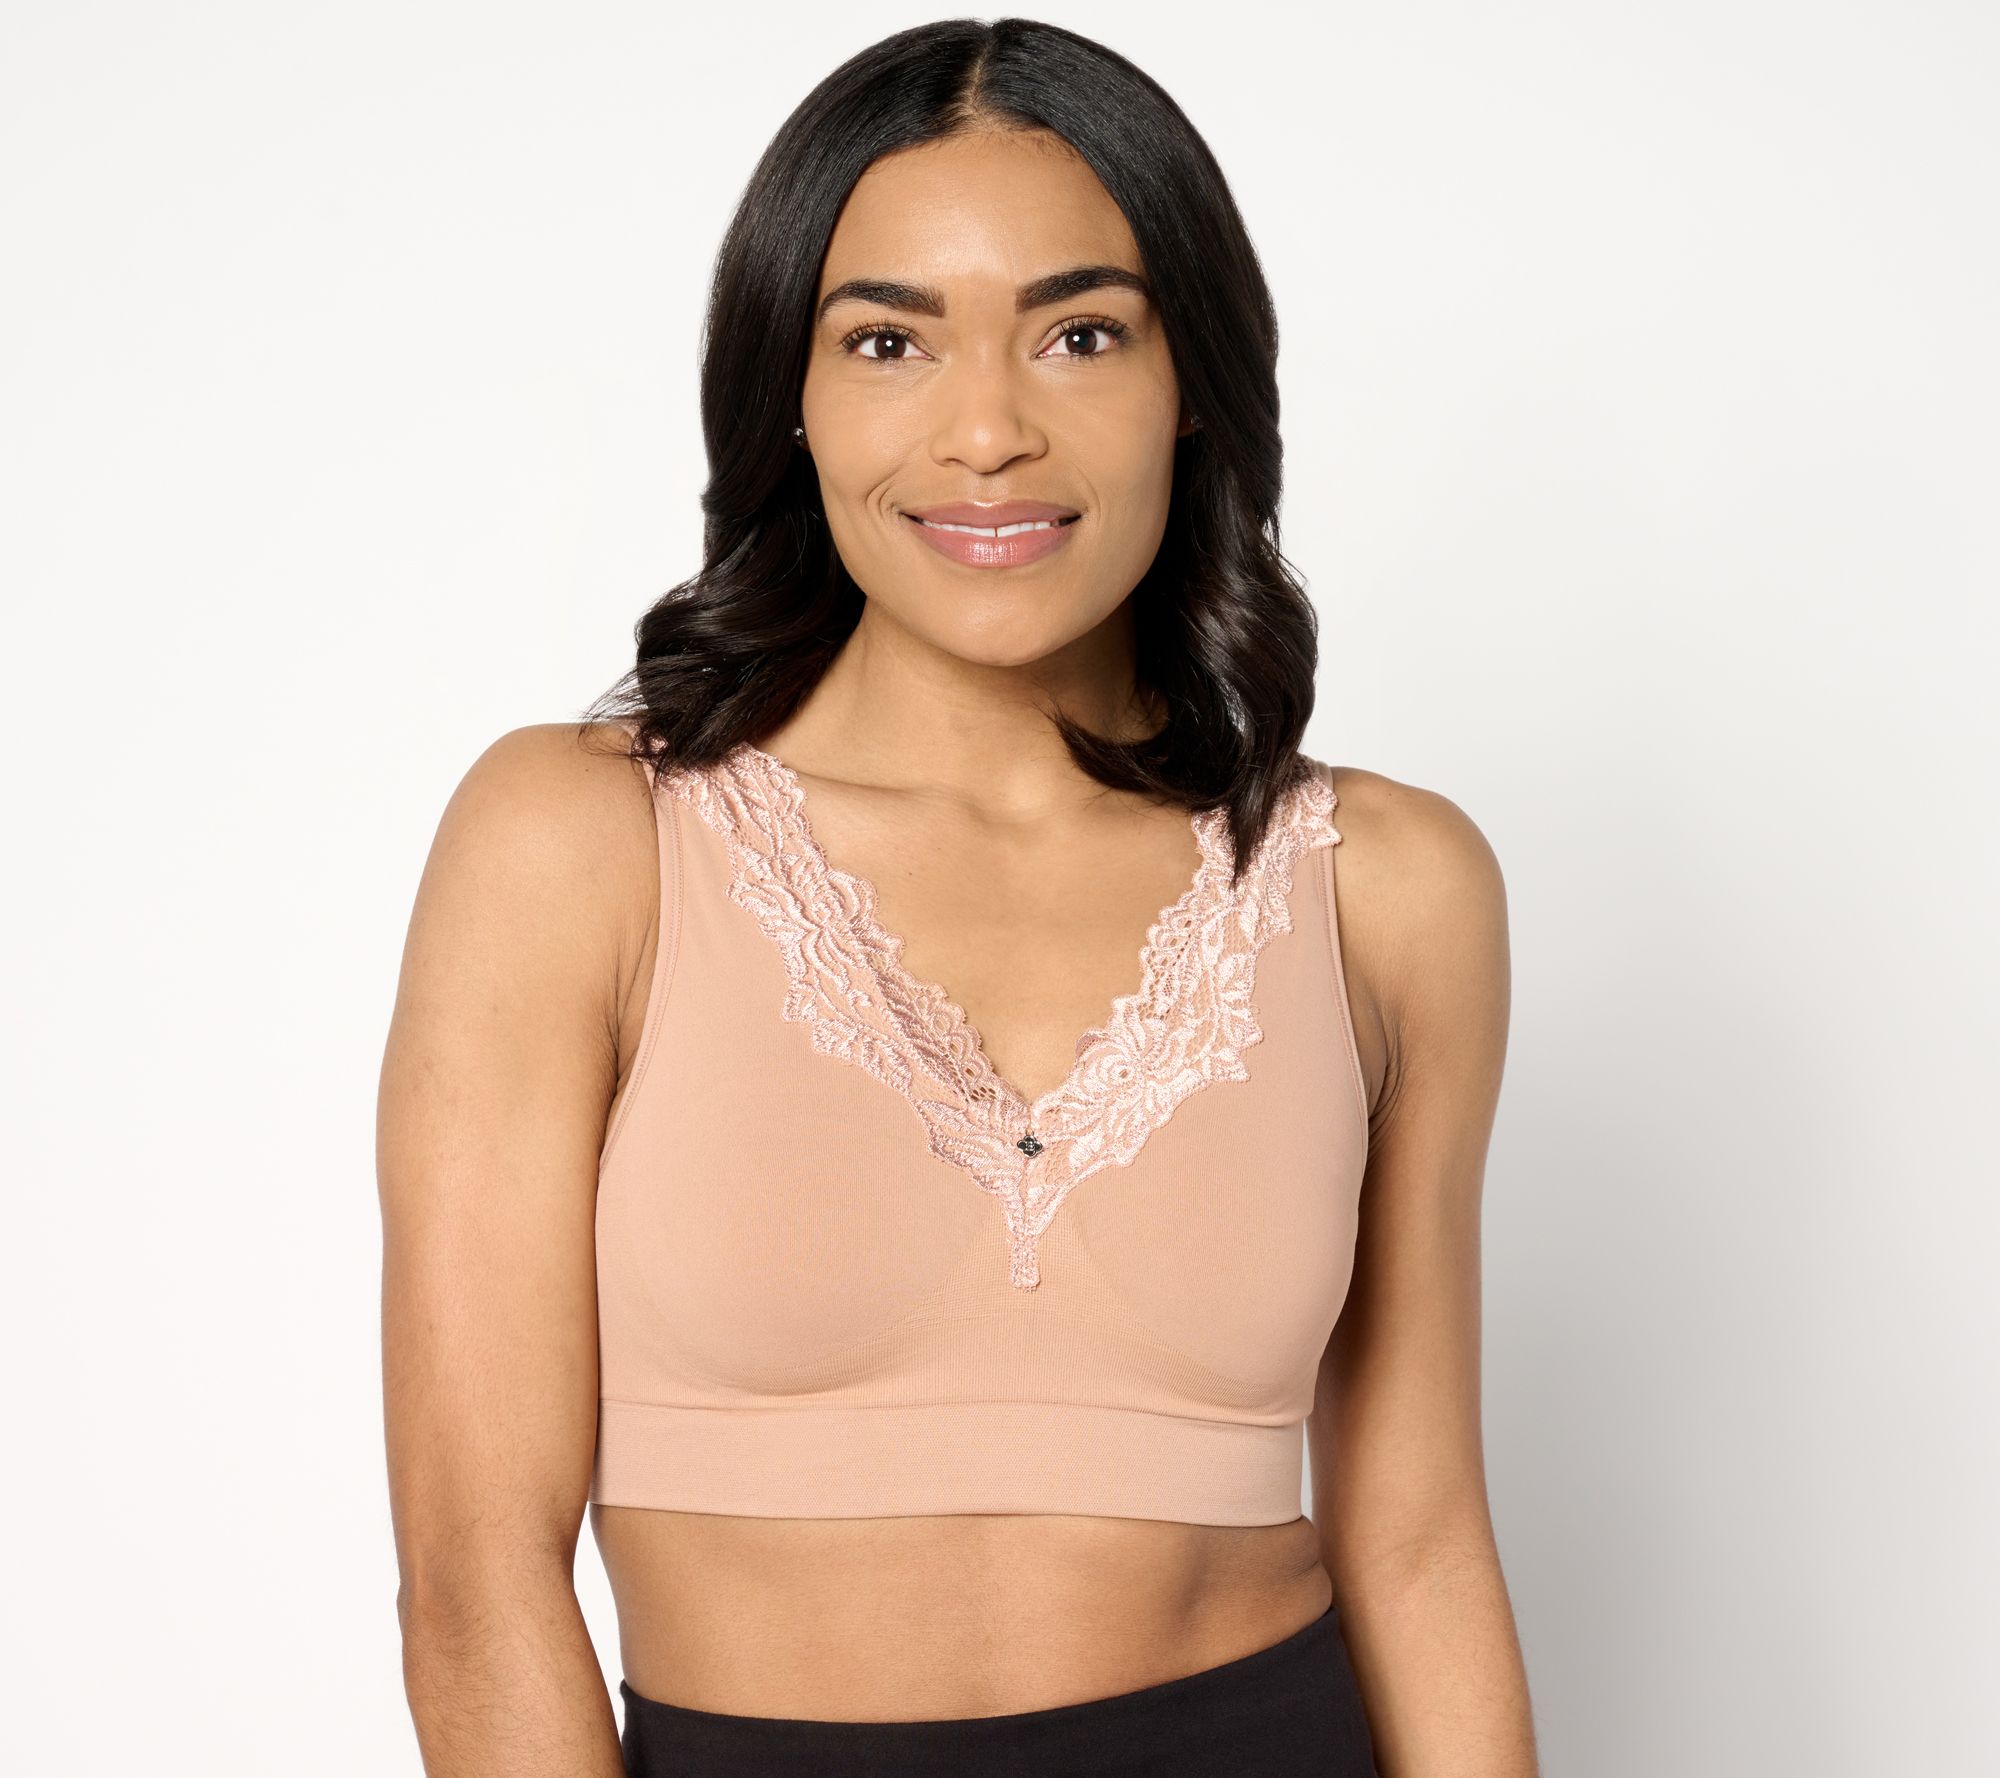 Athletic brands are investing in creating the perfect sports bra - Glossy